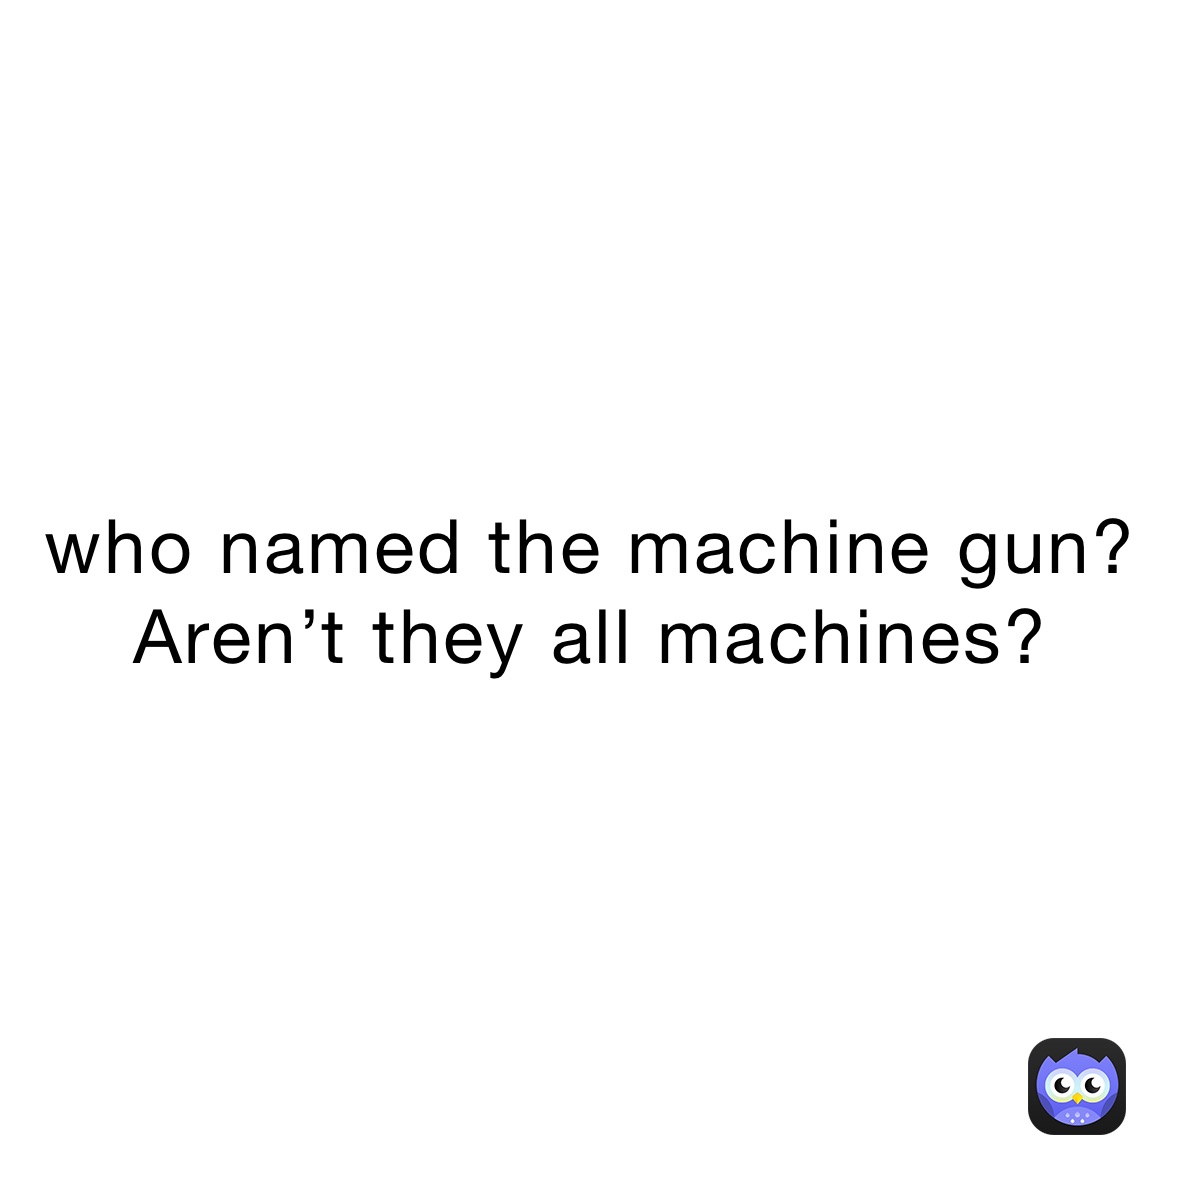 who named the machine gun? Aren’t they all machines?